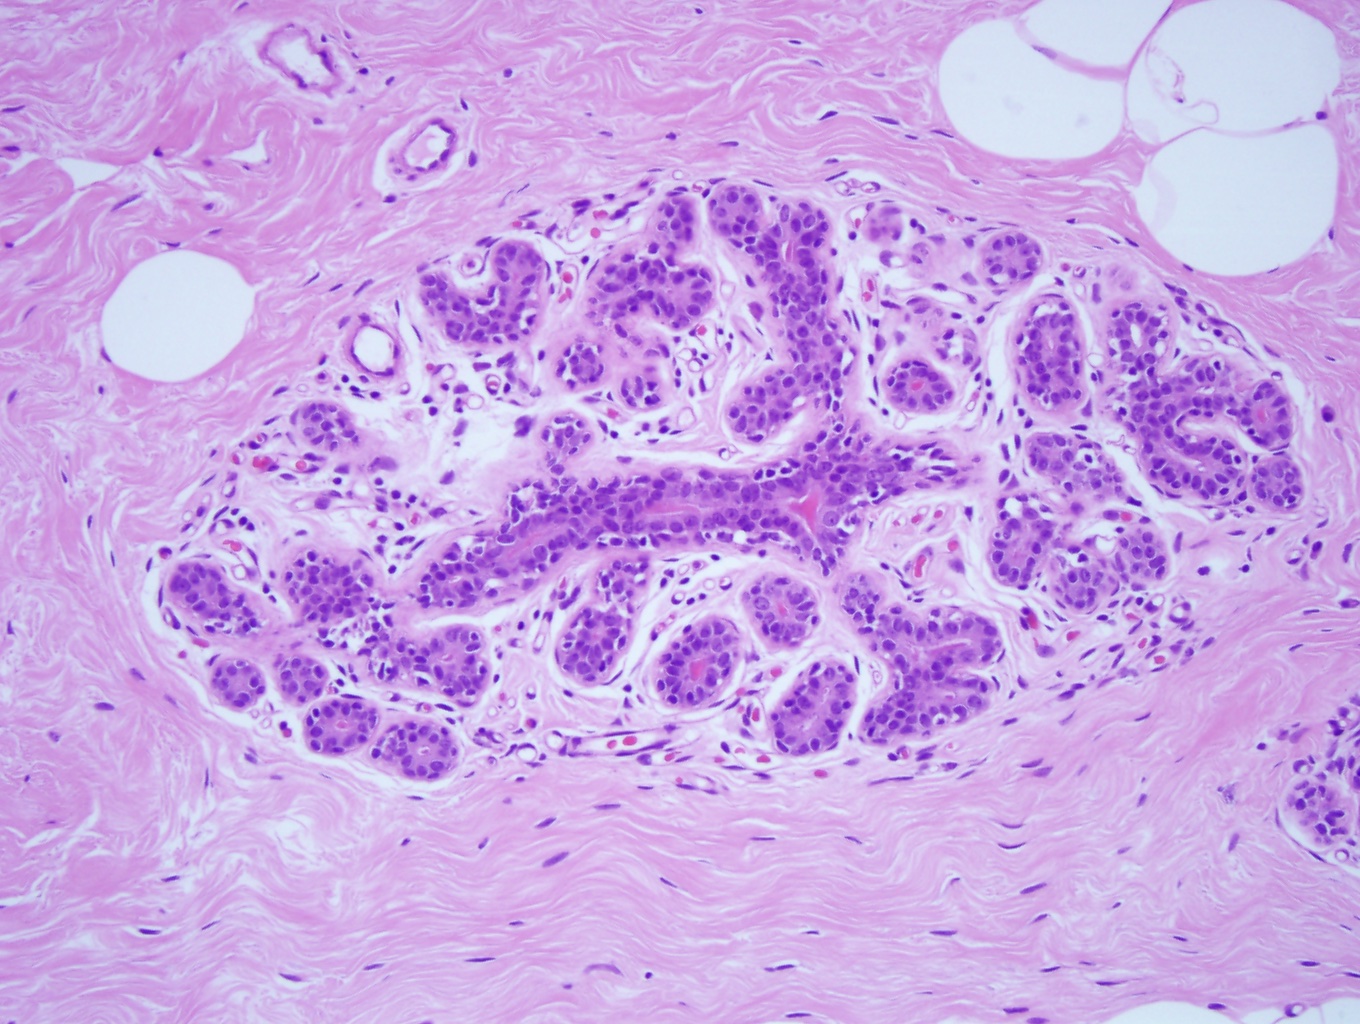 Microscopic anatomy of normal female breast tissue showing a terminal duct lobular unit (TDLU) . The ducts and lobules lumens are open as the epithelial cells do not distend them. Note the epithelial nuclei are overlapping, small, round, and the nucleoli are inconspicuous, consistent with benign breast tissue (x10).